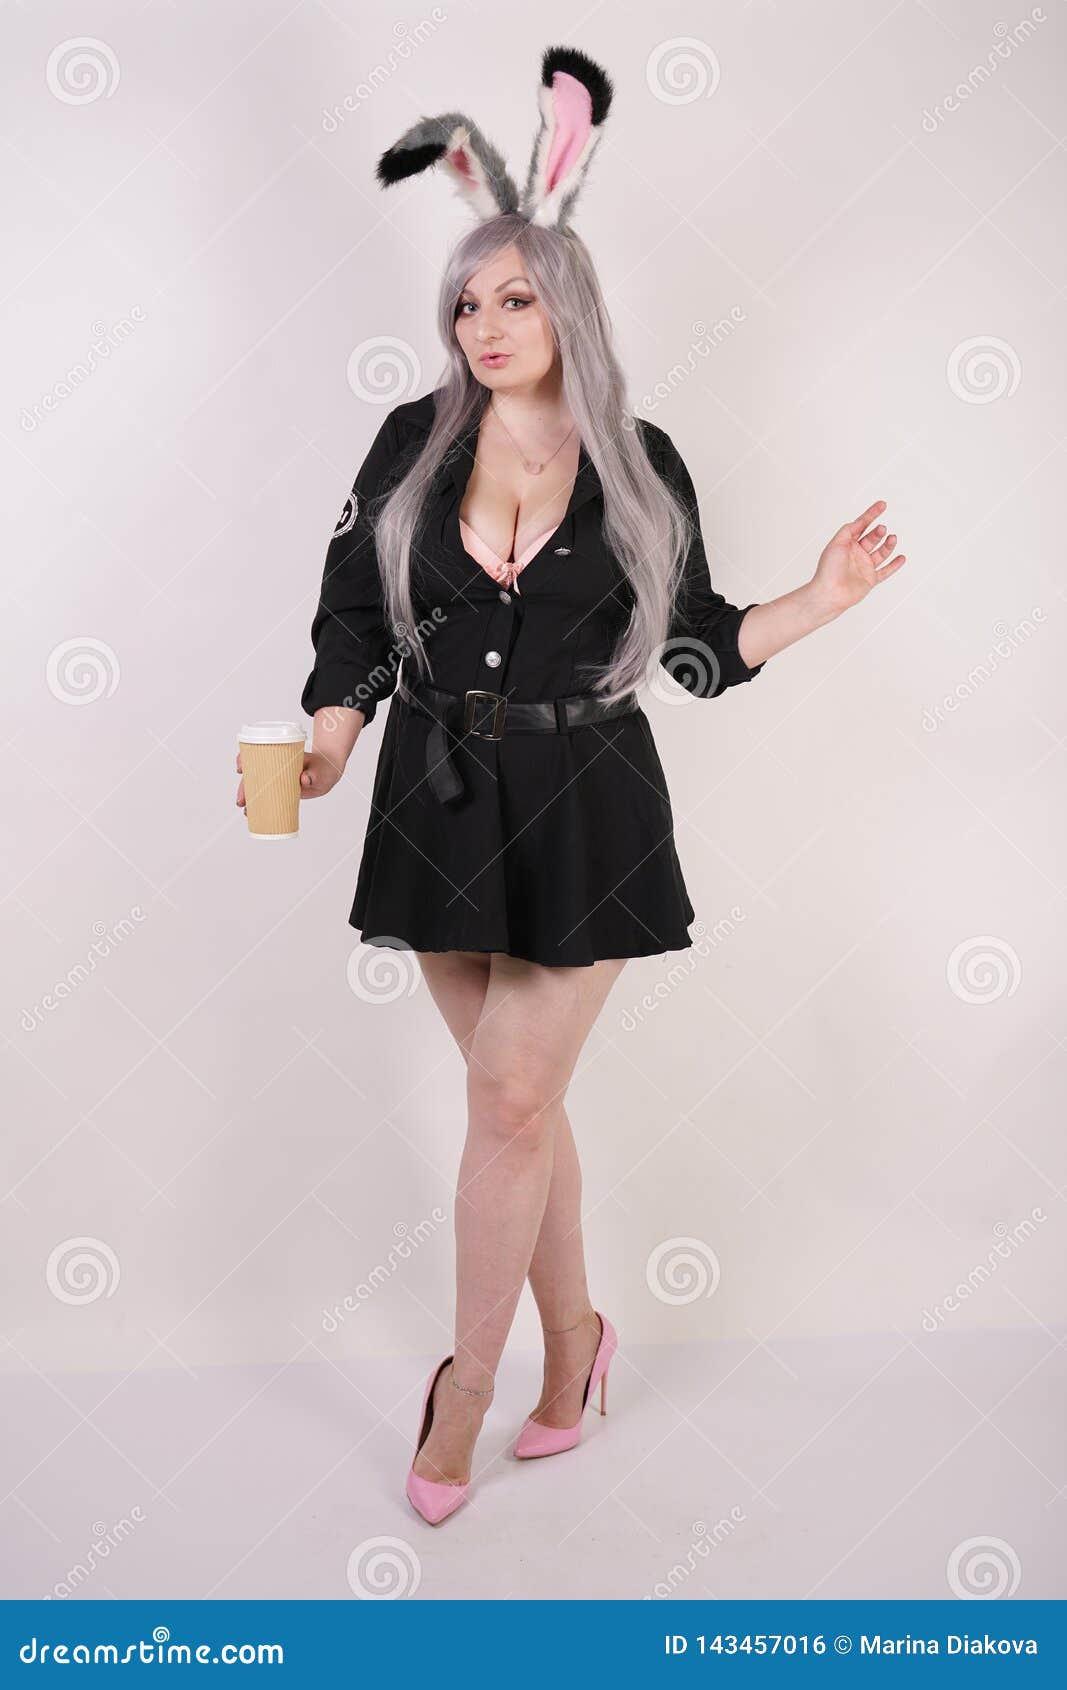 Cute Chubby Anime Girl with a Coffee in a Paper Cup on a White Background  in the Studio Stock Photo - Image of cute, isolated: 143457016